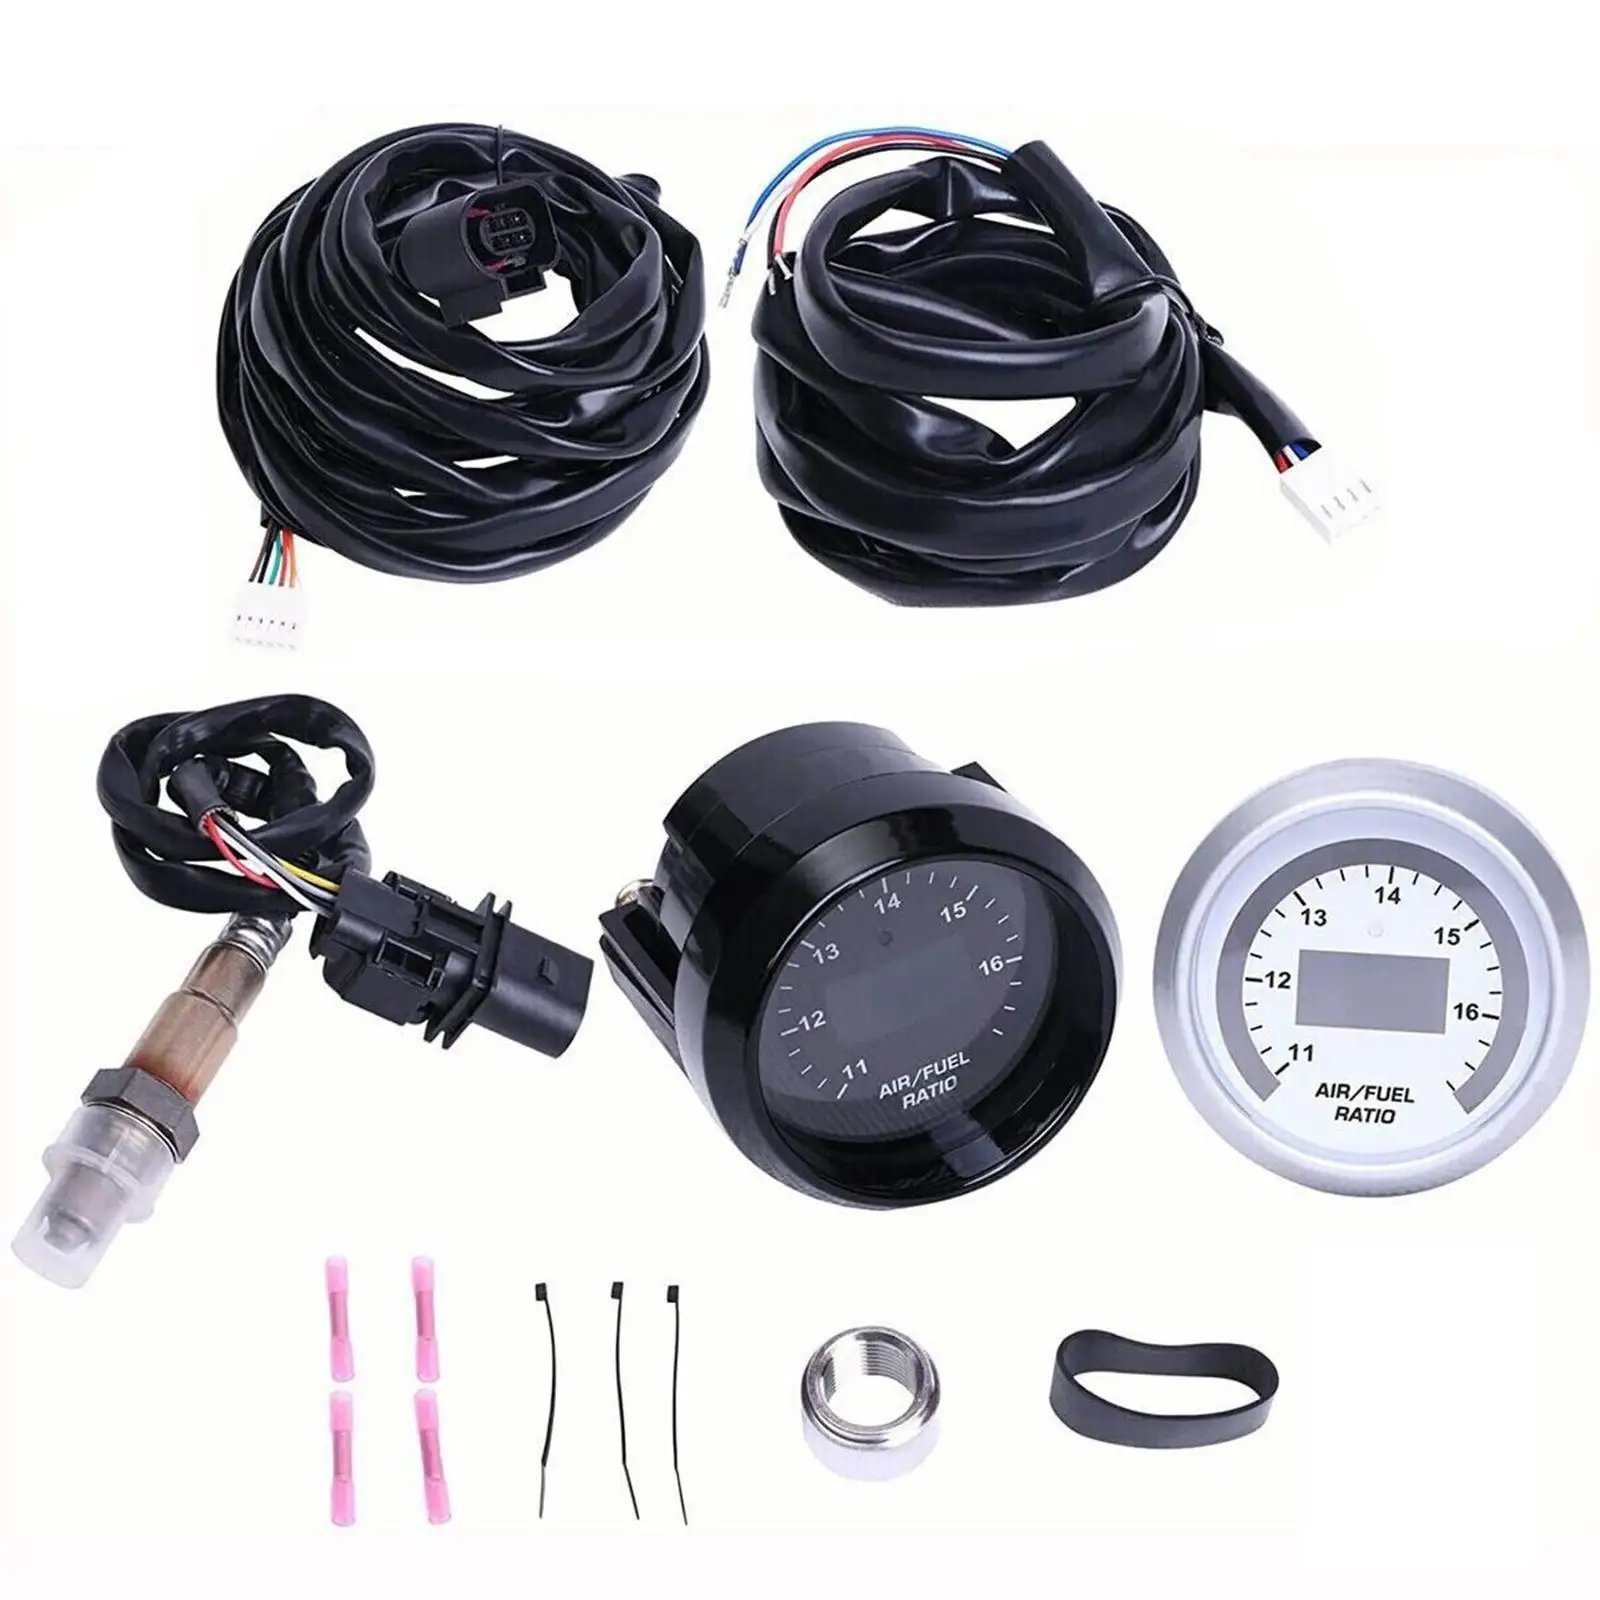 Air Fuel Ratio Gauge Kit with 4.9 Sensor Spare Parts Replacement 30-4110